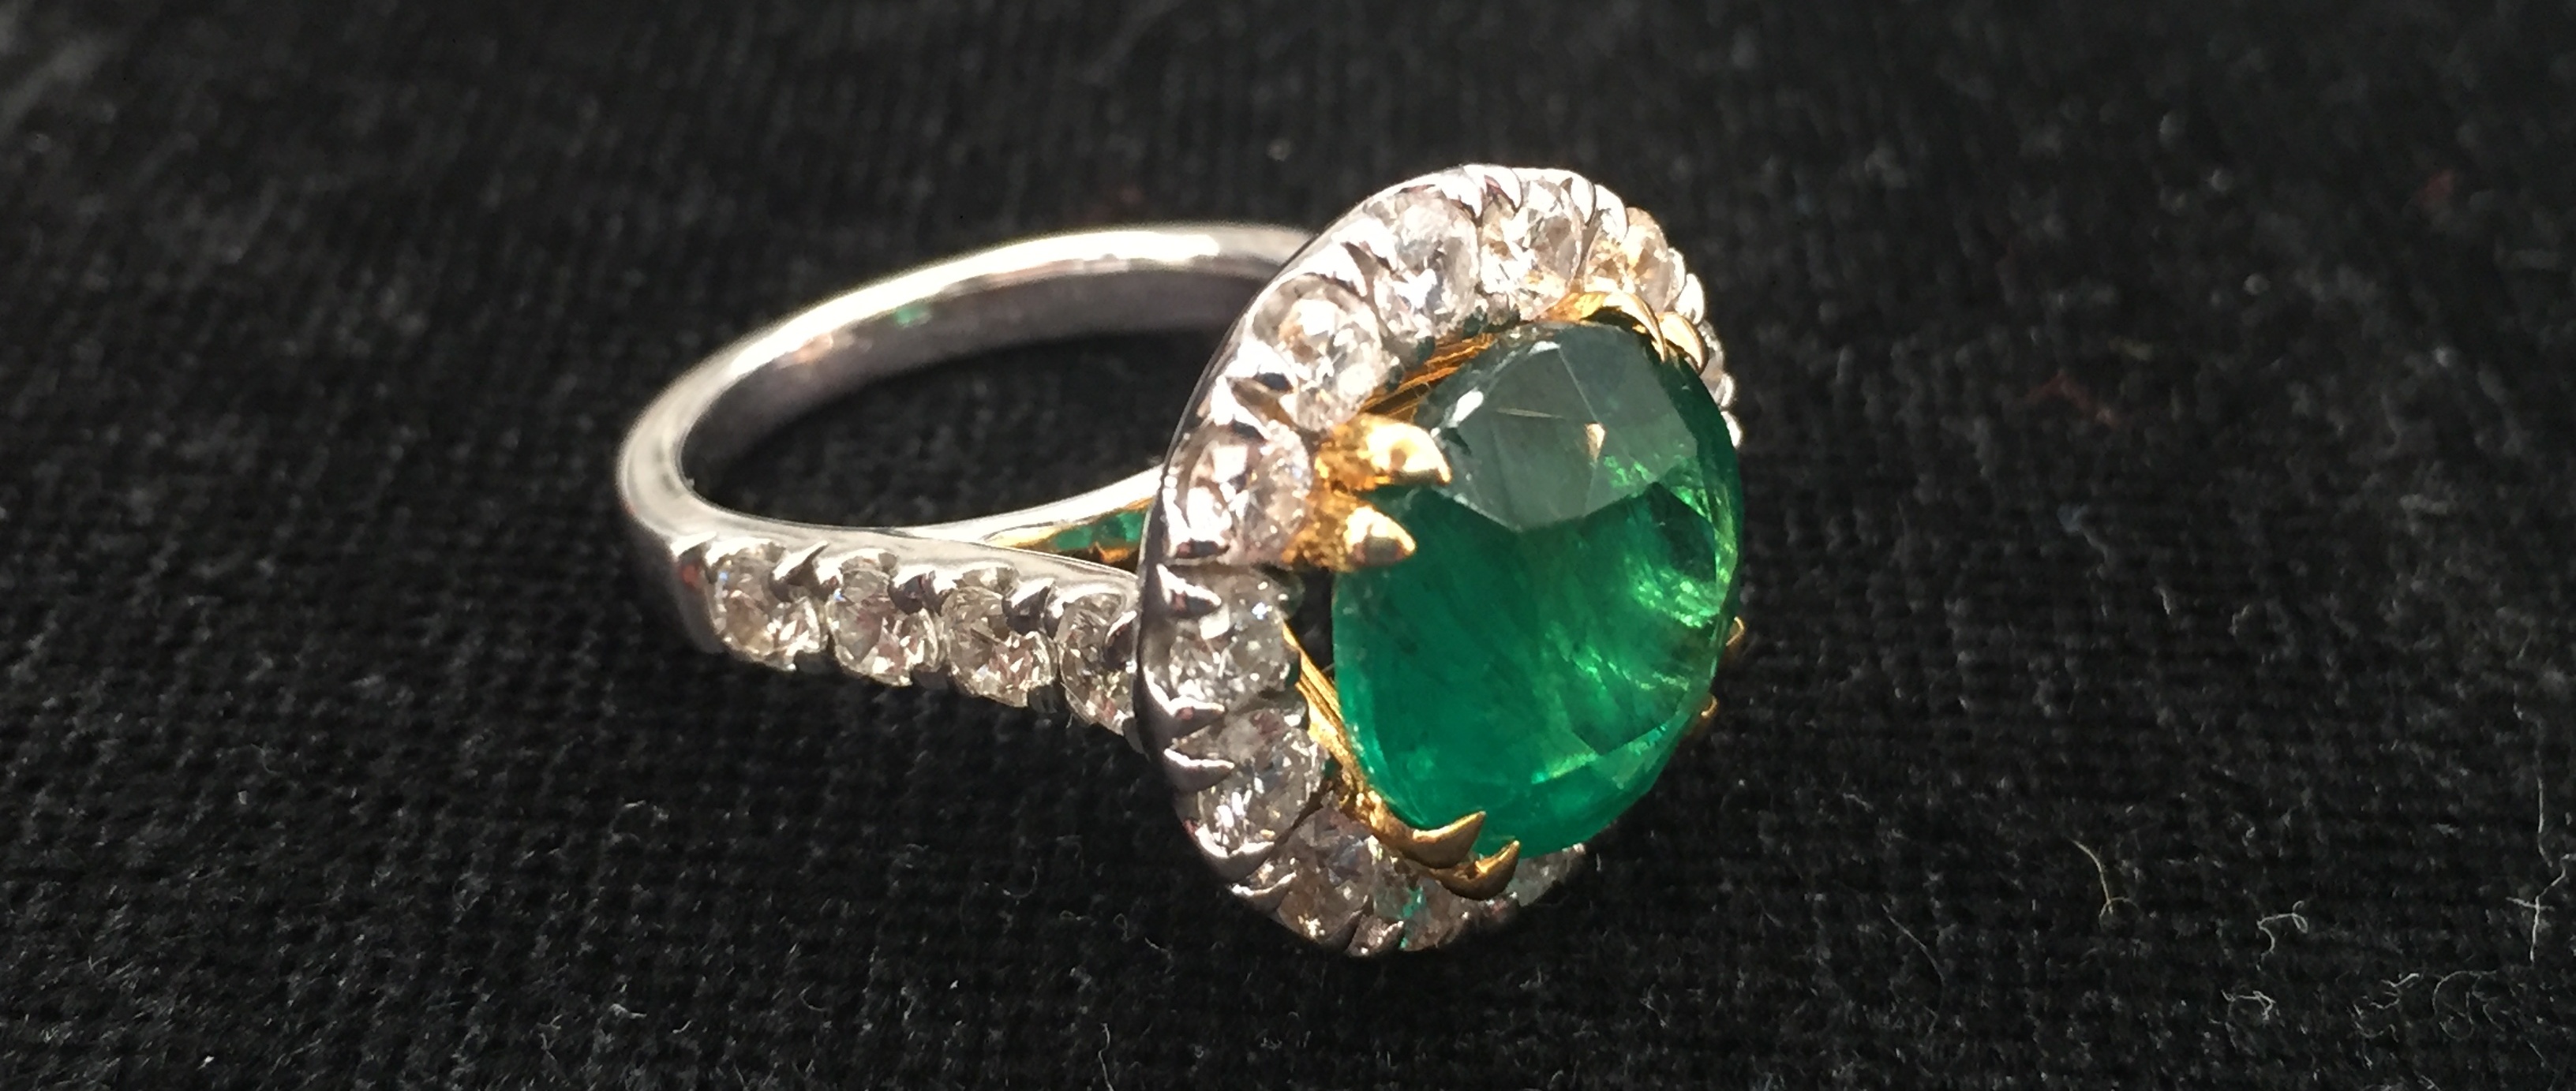 An 18ct large 6ct Zambian emerald ring with diamond set shoulders - Image 5 of 5